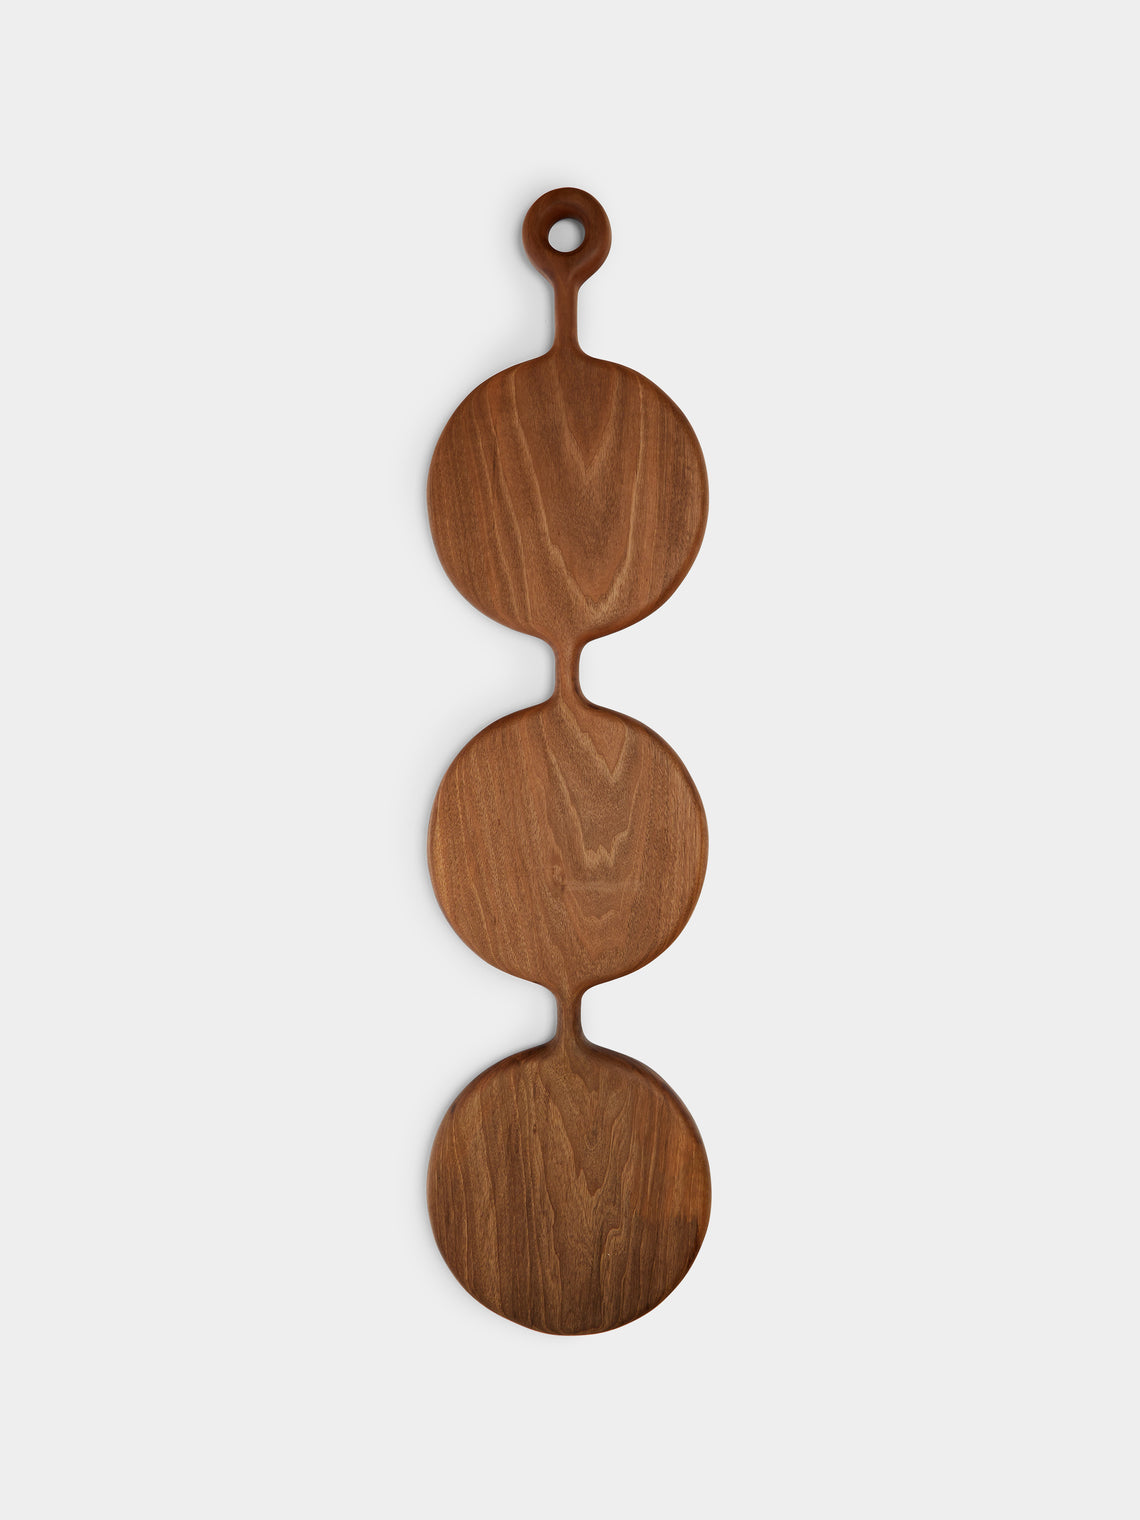 Lucas Castex - No. 3 Hand-Carved Oiled Walnut Serving Board -  - ABASK - 